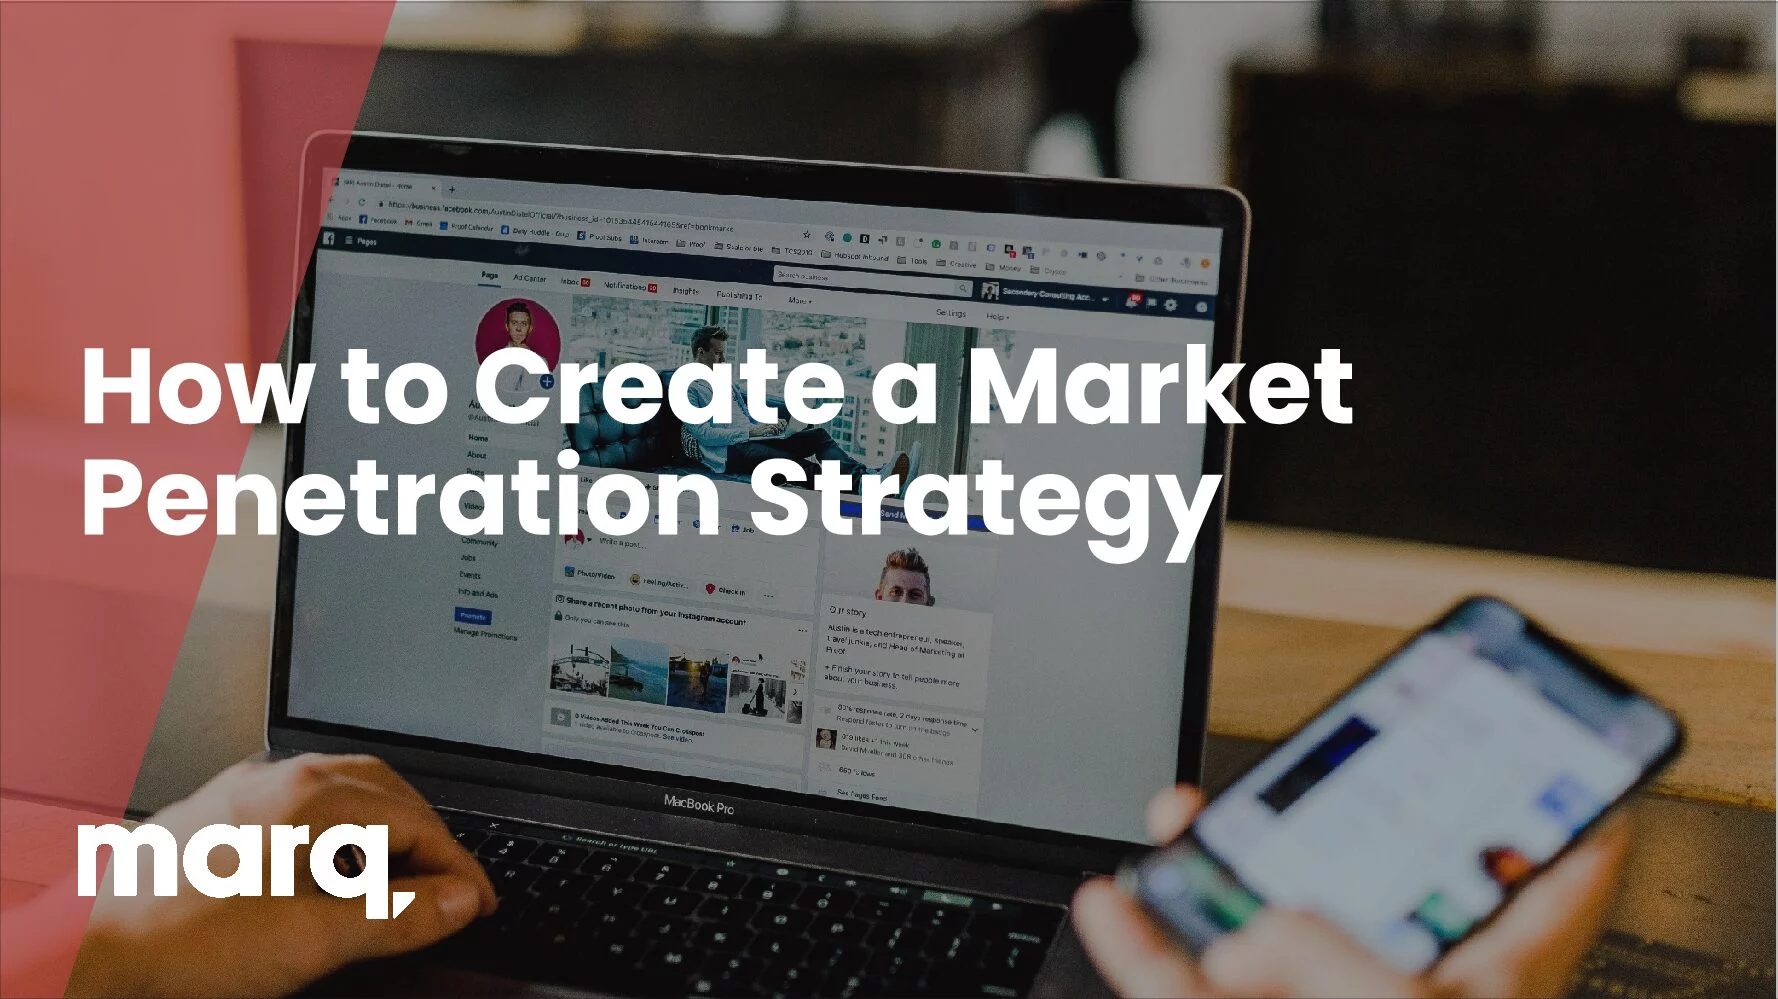 How to create a market penetration strategy